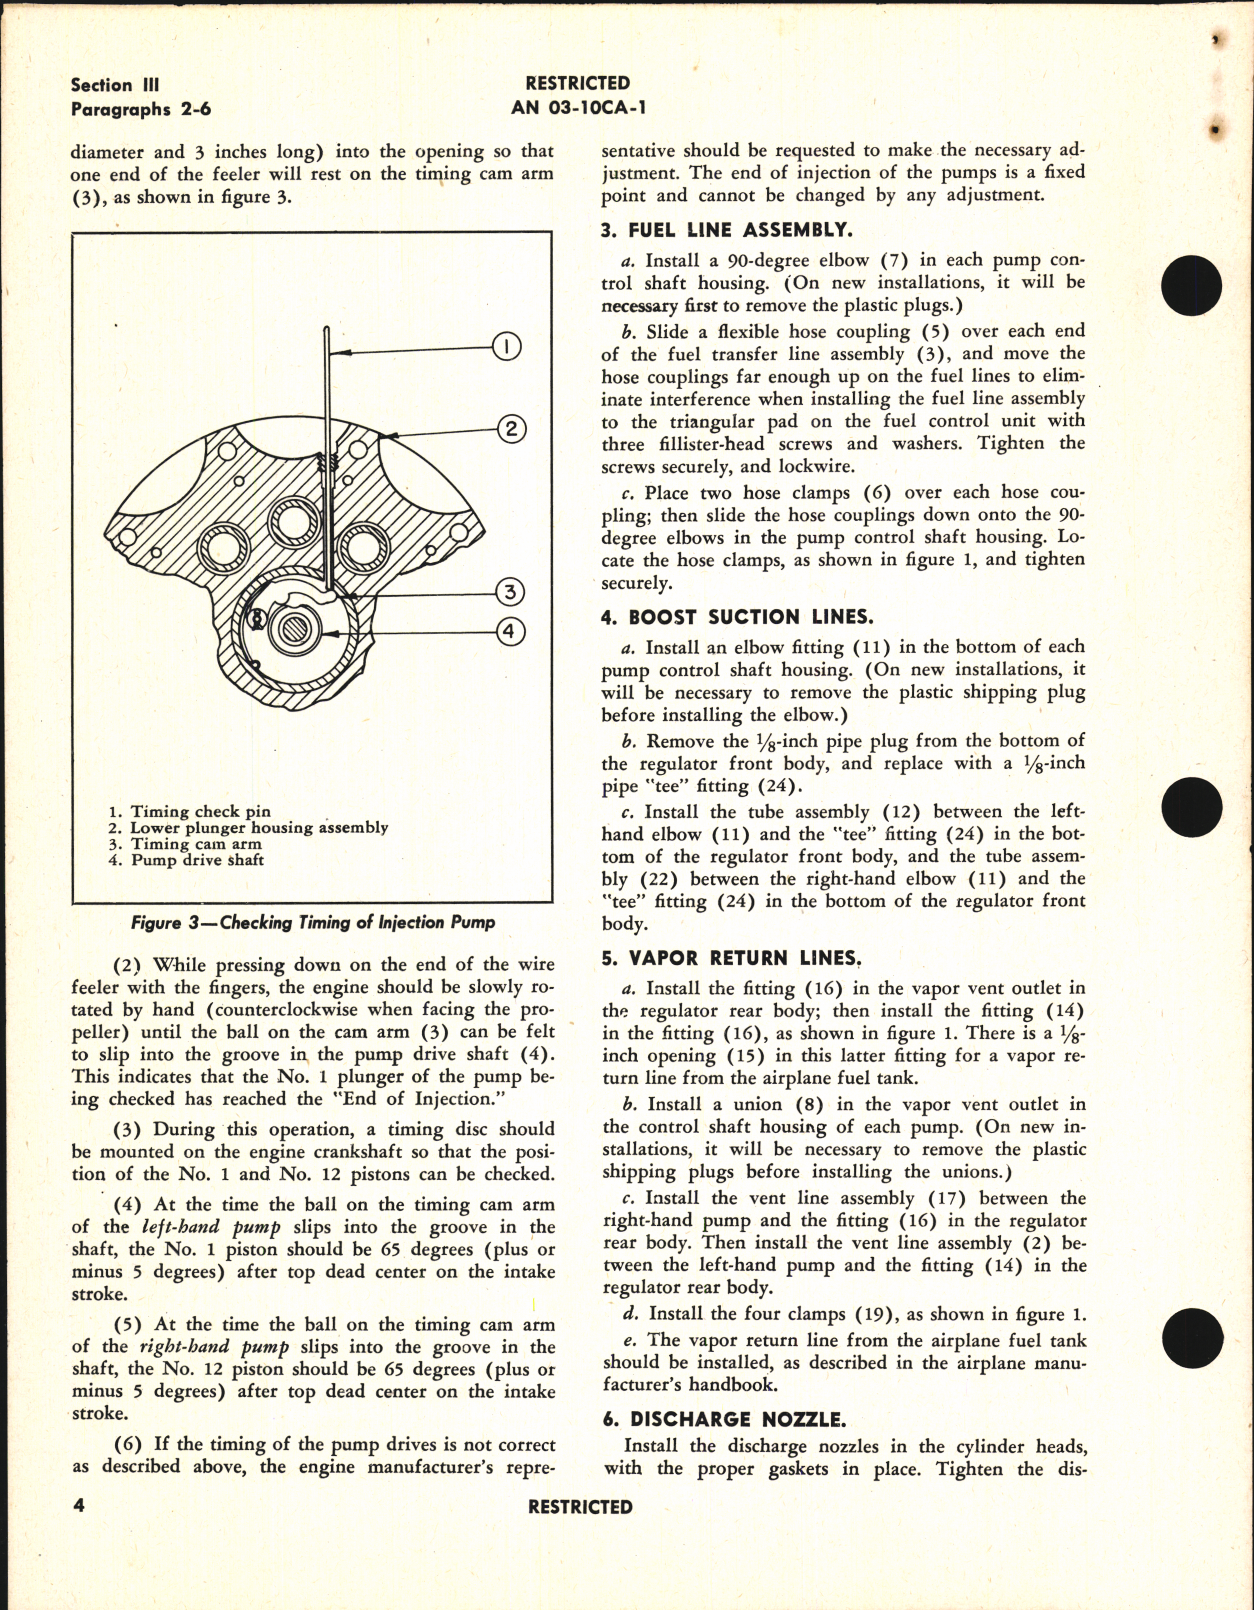 Sample page 8 from AirCorps Library document: Handbook of Instructions with Parts Catalog for Direct Fuel Injection System Model 58-18-A1A